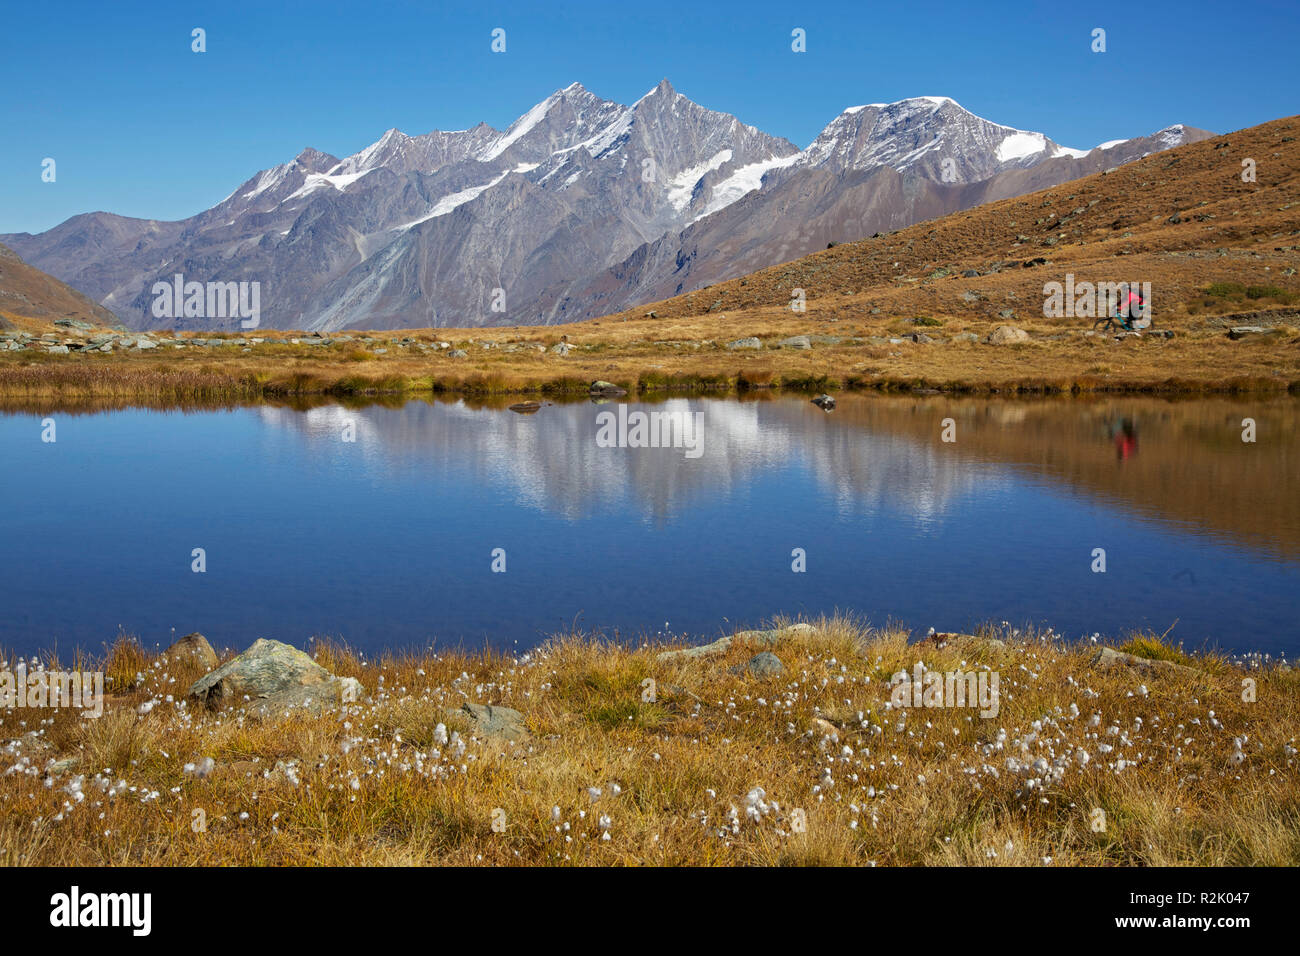 Flowering cotton grass at the Schwarzsee. View of the peaks of the Mischabel and Allalin groups. From left Nadelhorn, Dom, Taeschhorn and Alphubel. Stock Photo